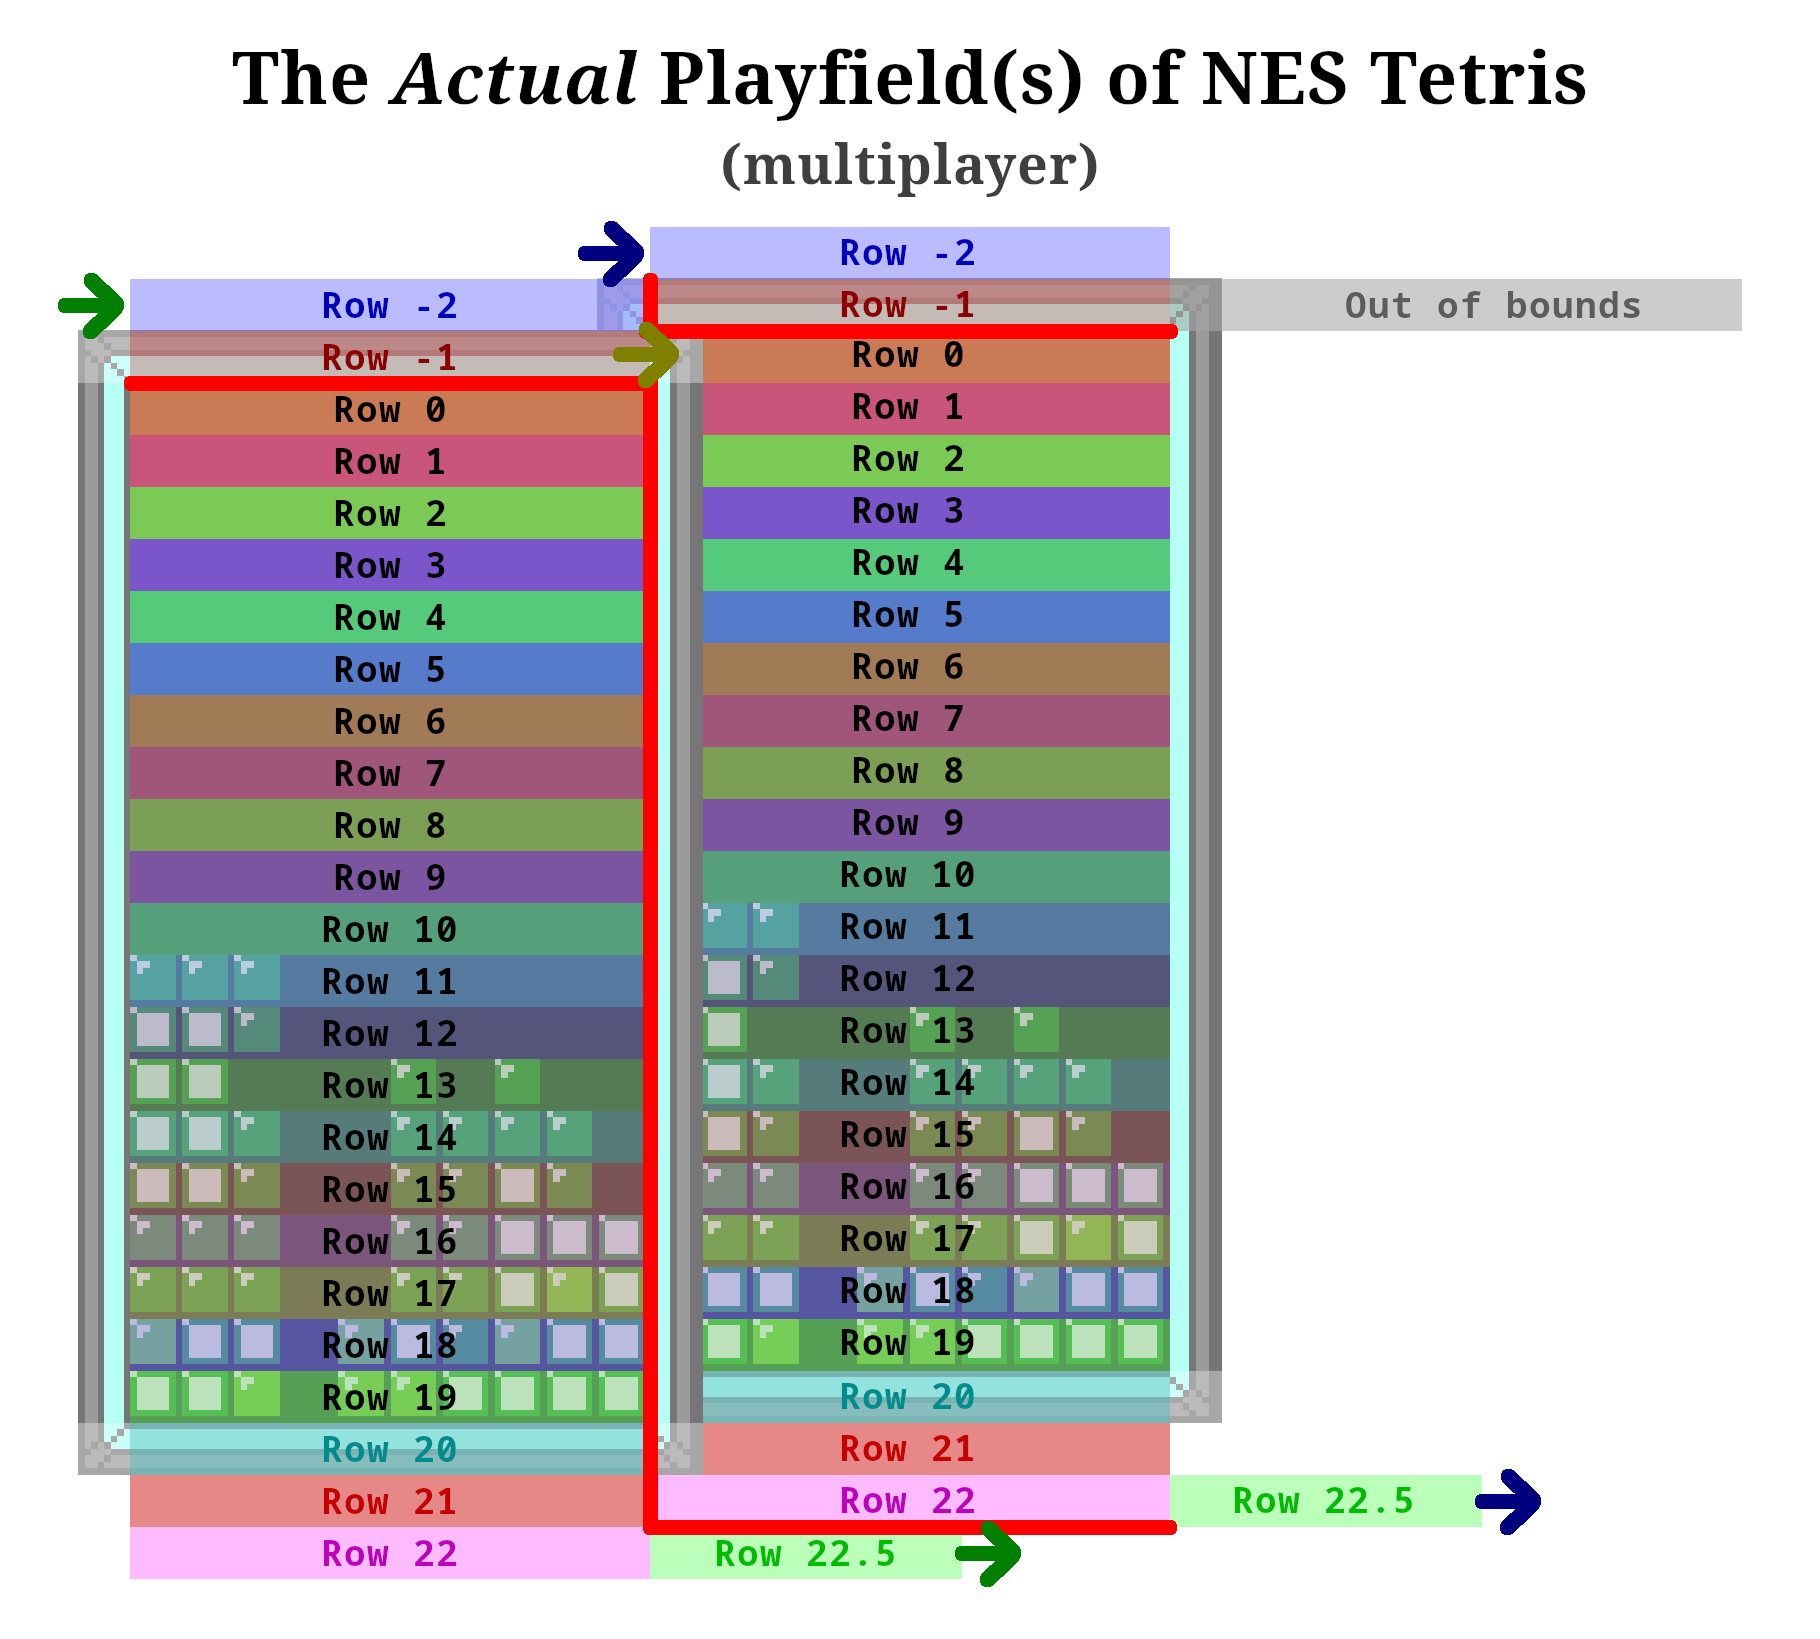 The Actual Playfield of NES Tetris (multiplayer): same as the first playfield diagram, but there's a second playfield to the right of the first one, and what was once out of bounds for the first playfield now feeds into row 0 of the second playfield. The second playfield feeds into out of bounds space.